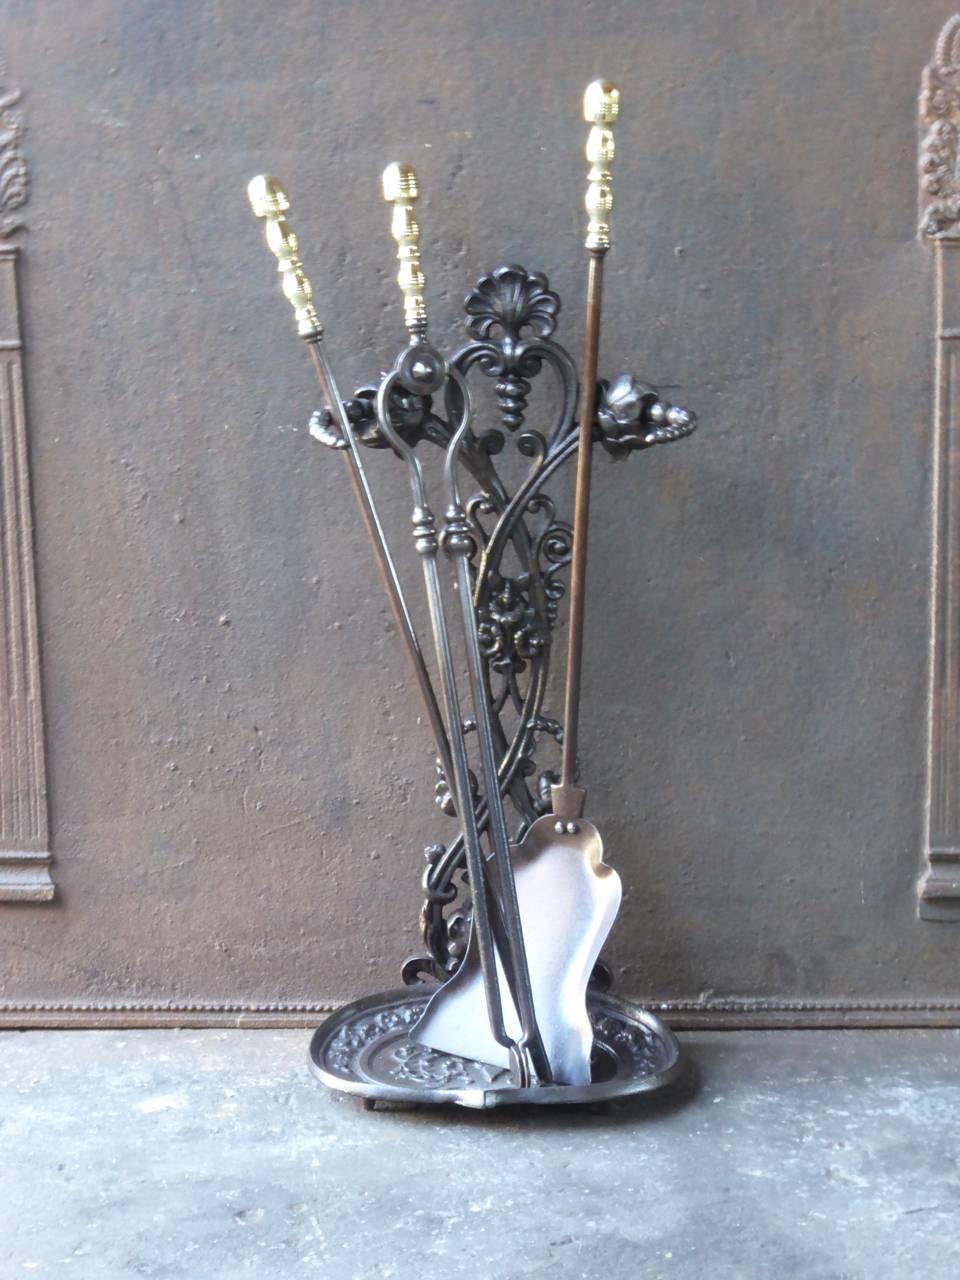 19th century English fireplace toolset made of wrought iron, cast iron and polished brass.